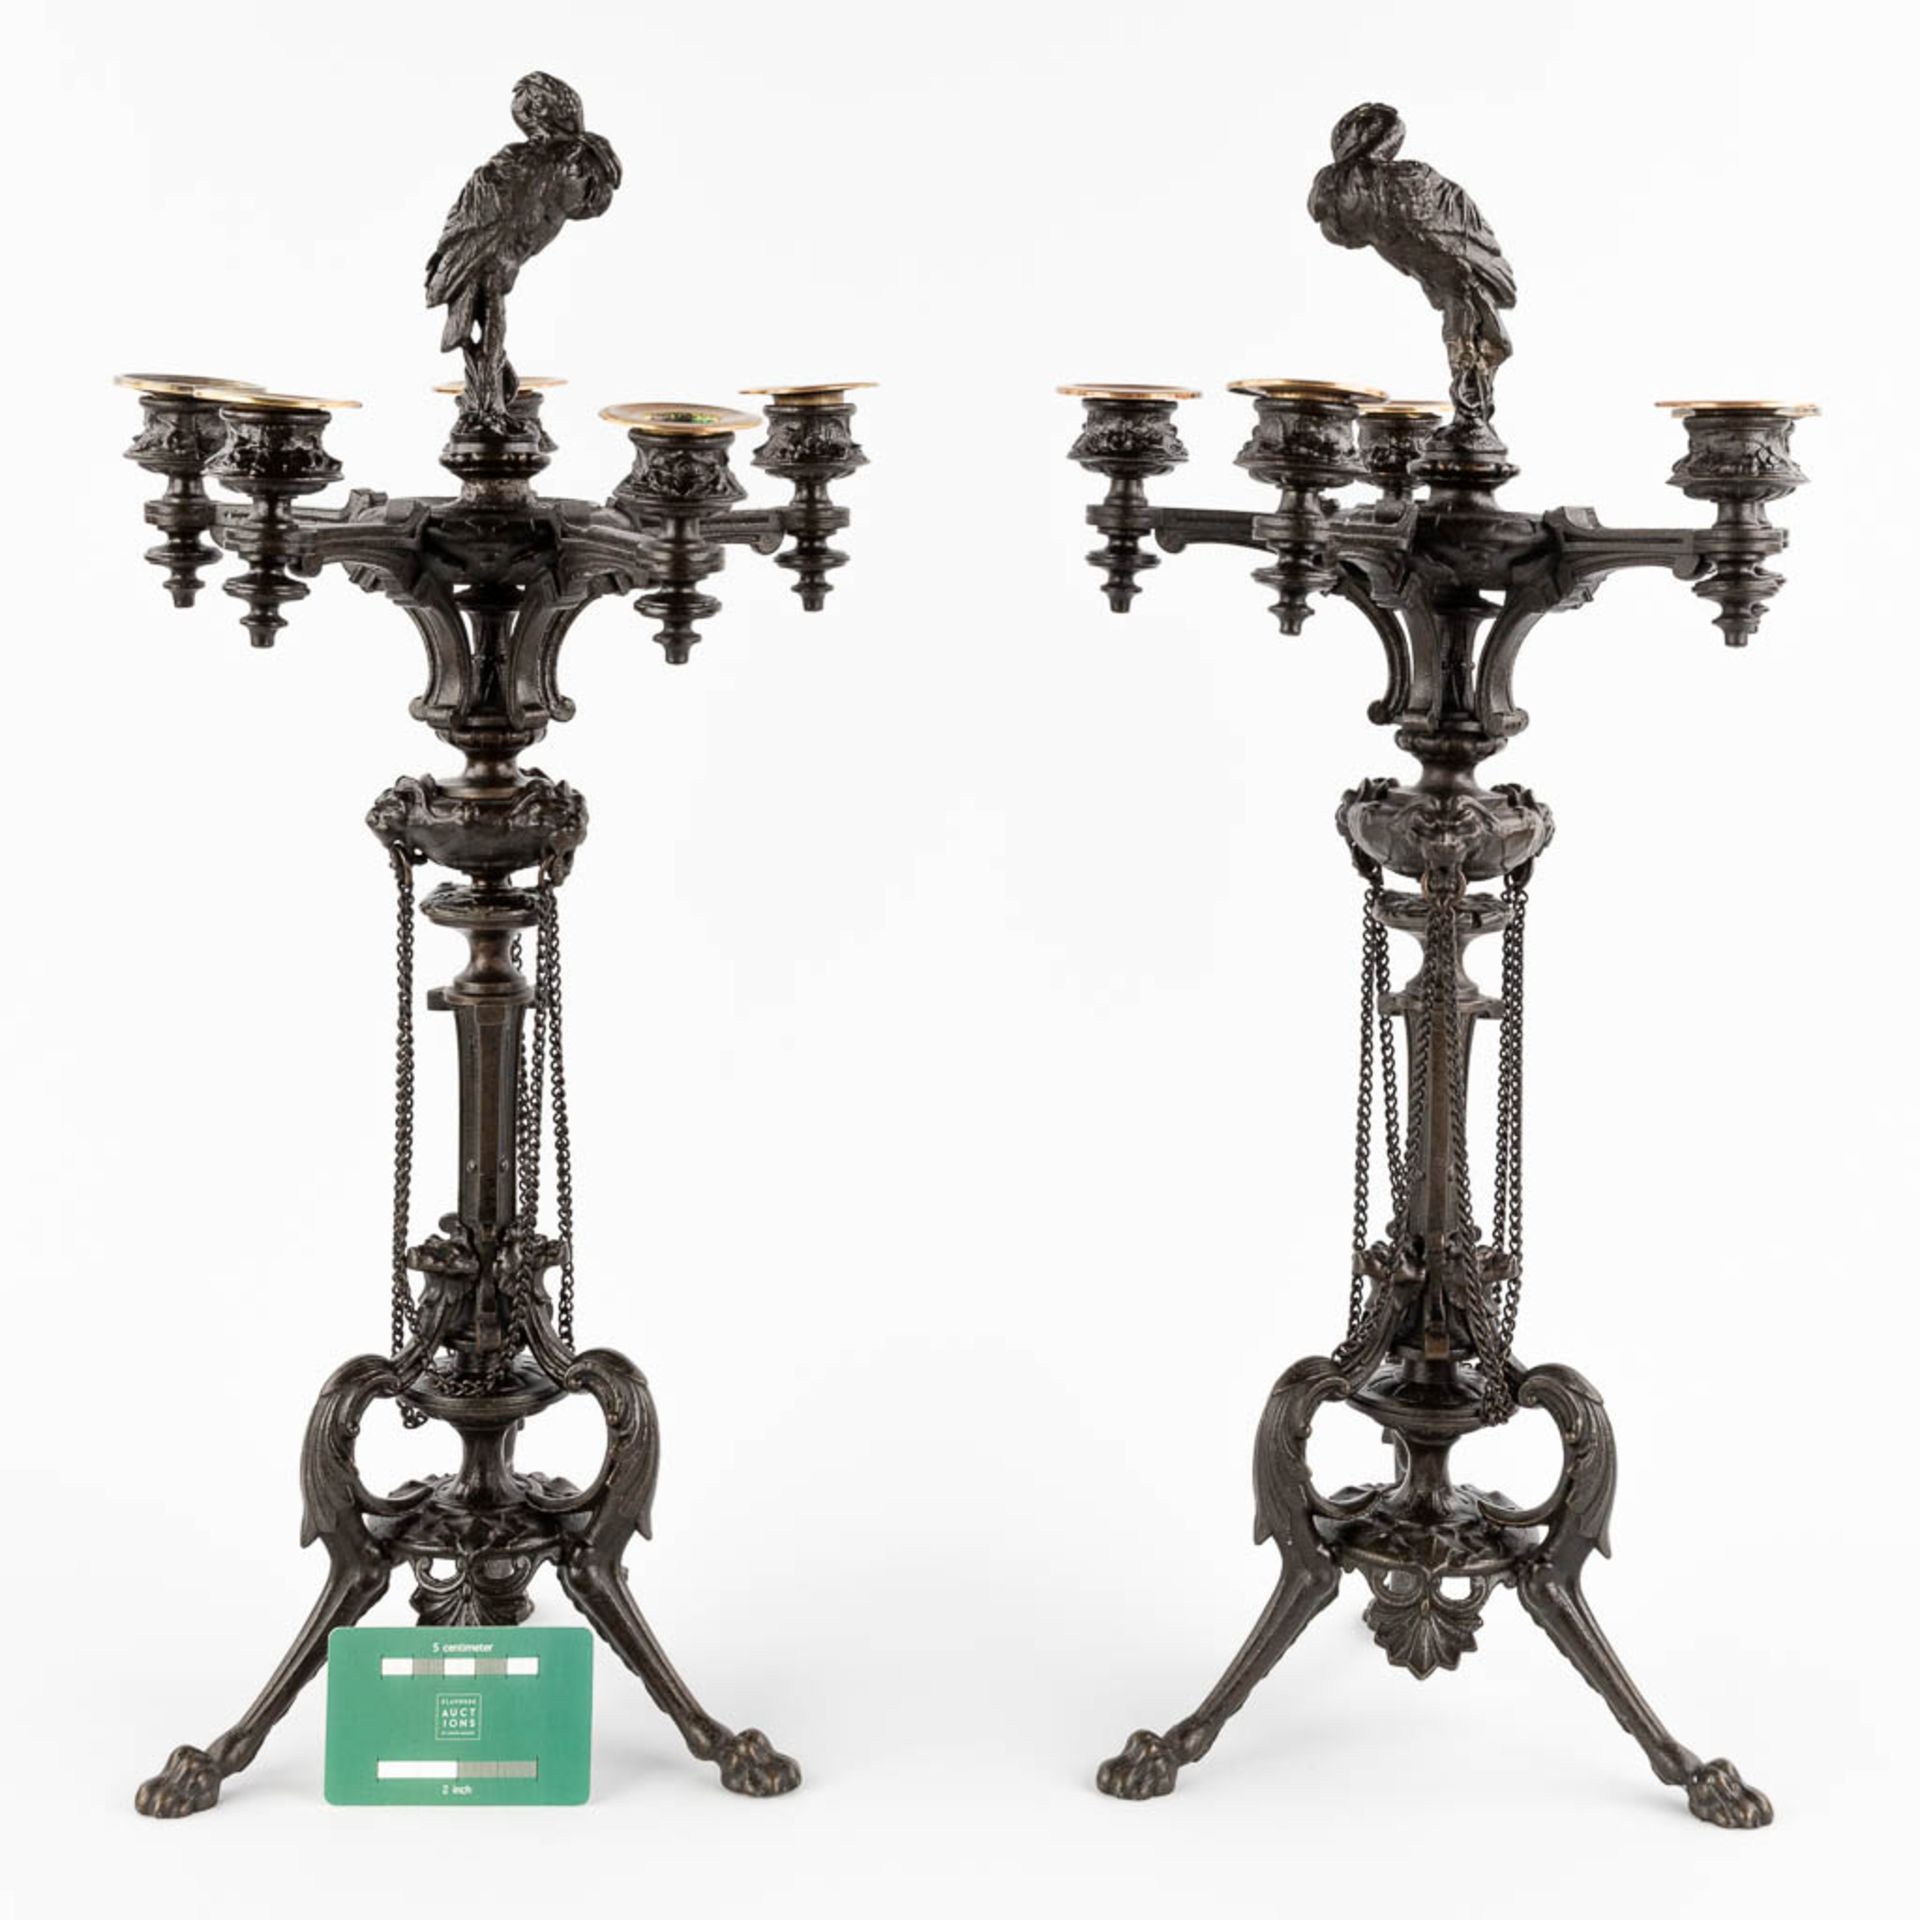 A pair of candelabra, bronze decorated with birds. 19th C. (H:56 x D:26 cm) - Image 2 of 12